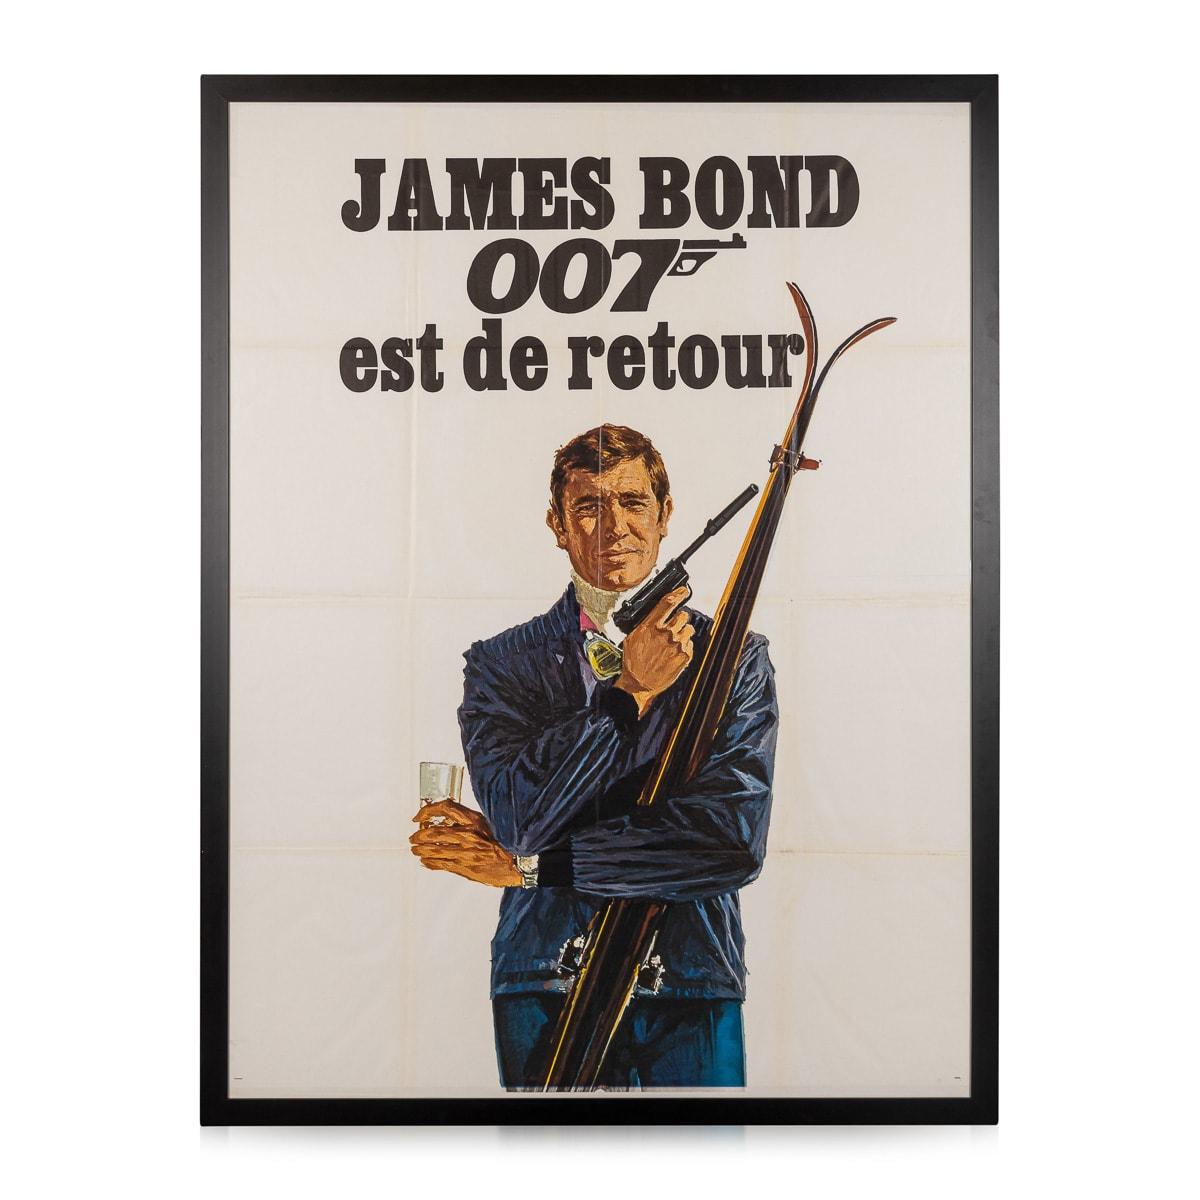 A spy film and the sixth in the James Bond series produced by Eon Productions. It is based on the 1963 novel by Ian Fleming. Following Sean Connery's decision to retire from the role after You Only Live Twice, Eon Productions selected George